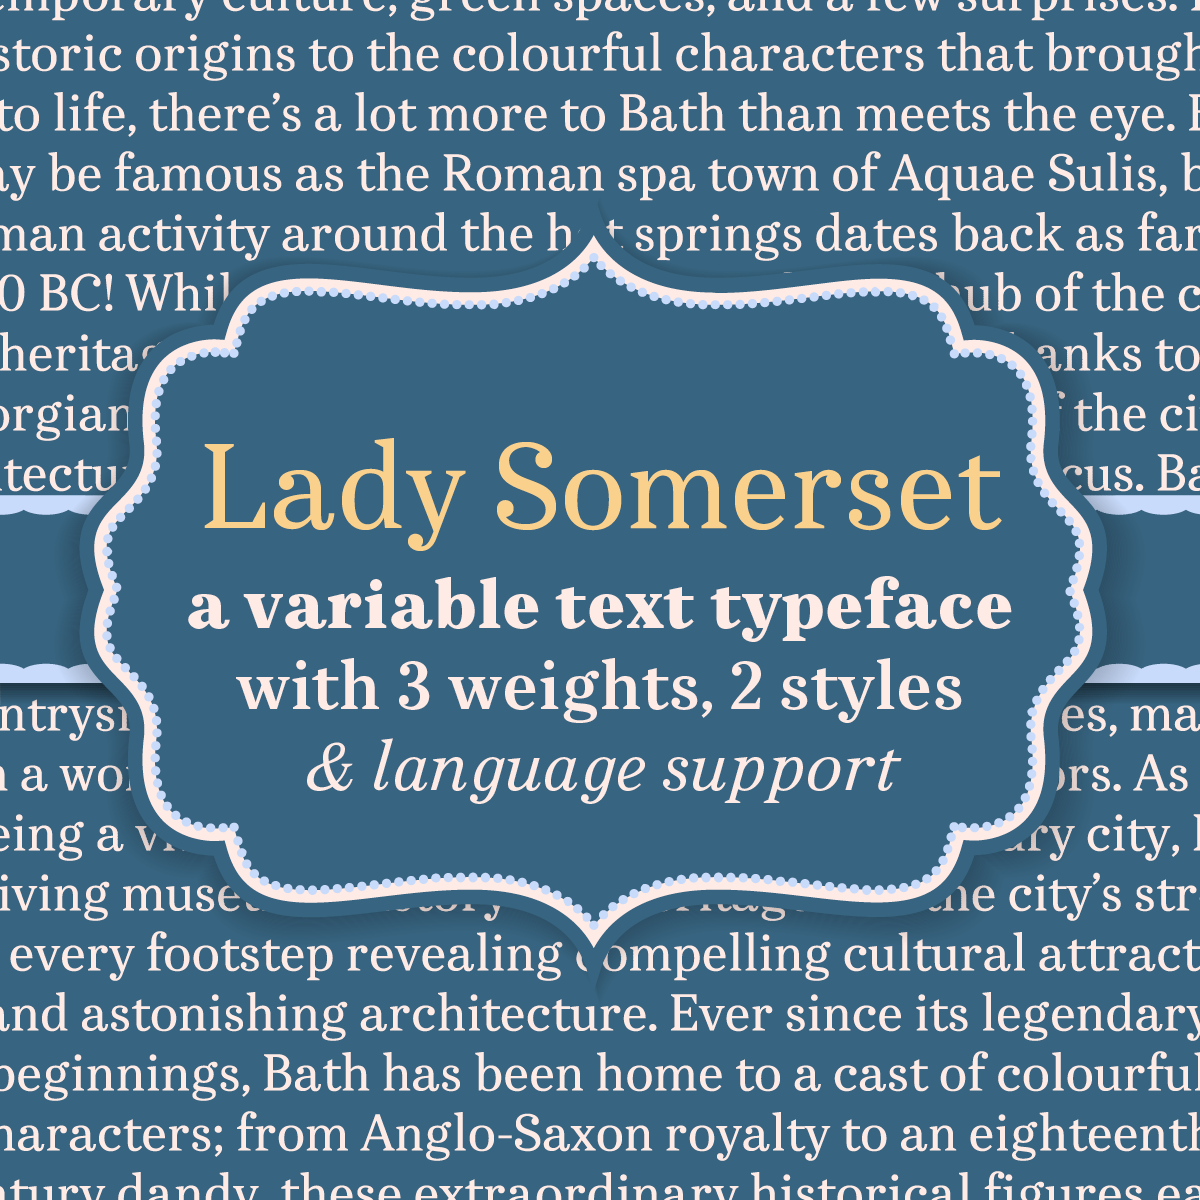 Lady Somerset title image. Lady Somerset a variable text typeface with 3 weights, 2 styles & language support. Text type about Bath, UK running in the background.